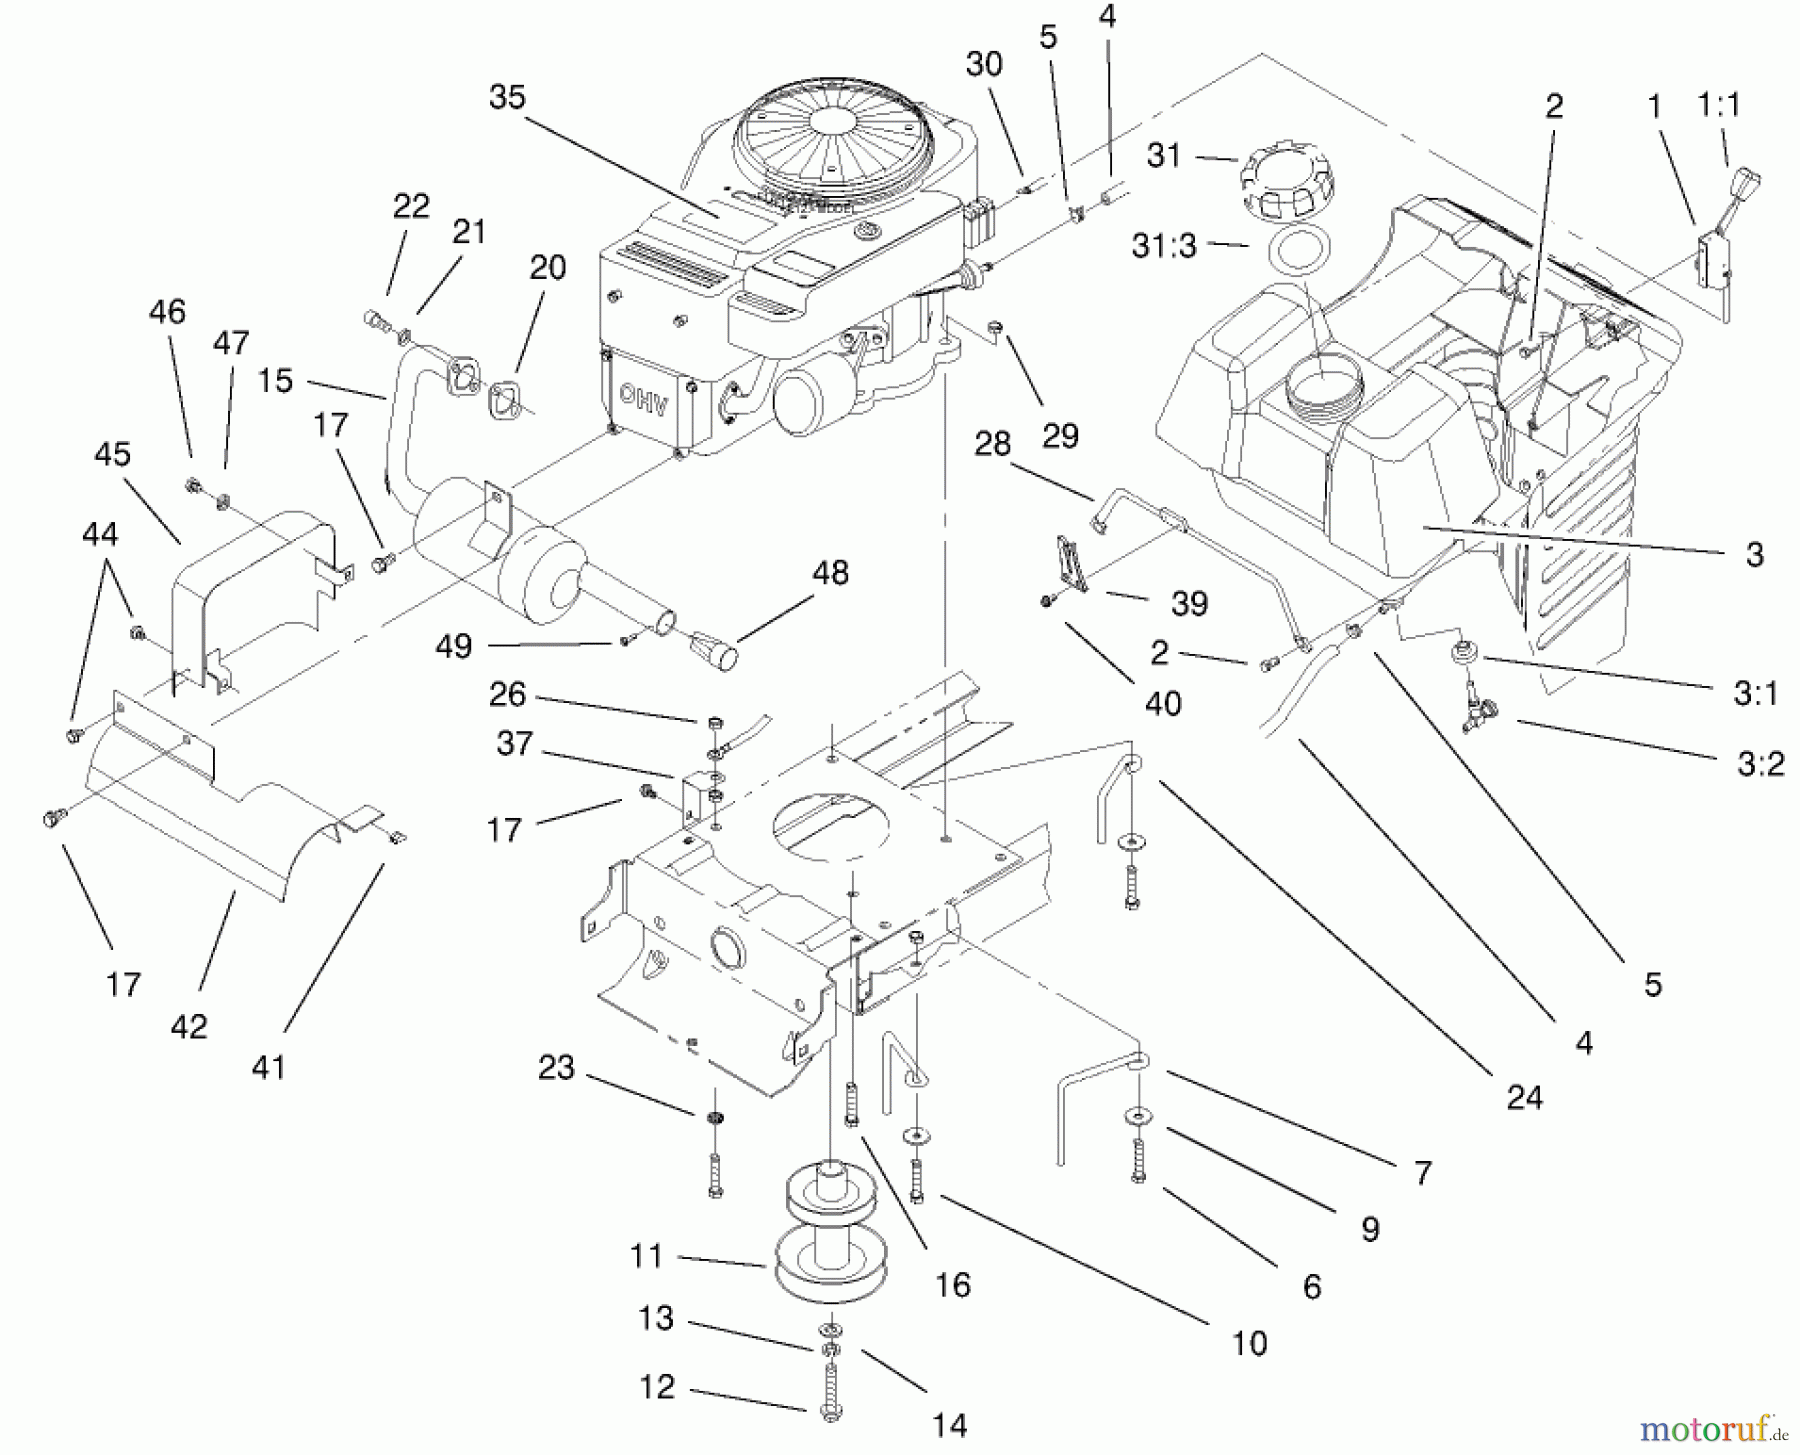  Toro Neu Mowers, Lawn & Garden Tractor Seite 1 77106 (17-44H) - Toro 17-44H Lawn Tractor, 2000 (200000001-200999999) ENGINE SYSTEMS COMPONENTS ASSEMBLY